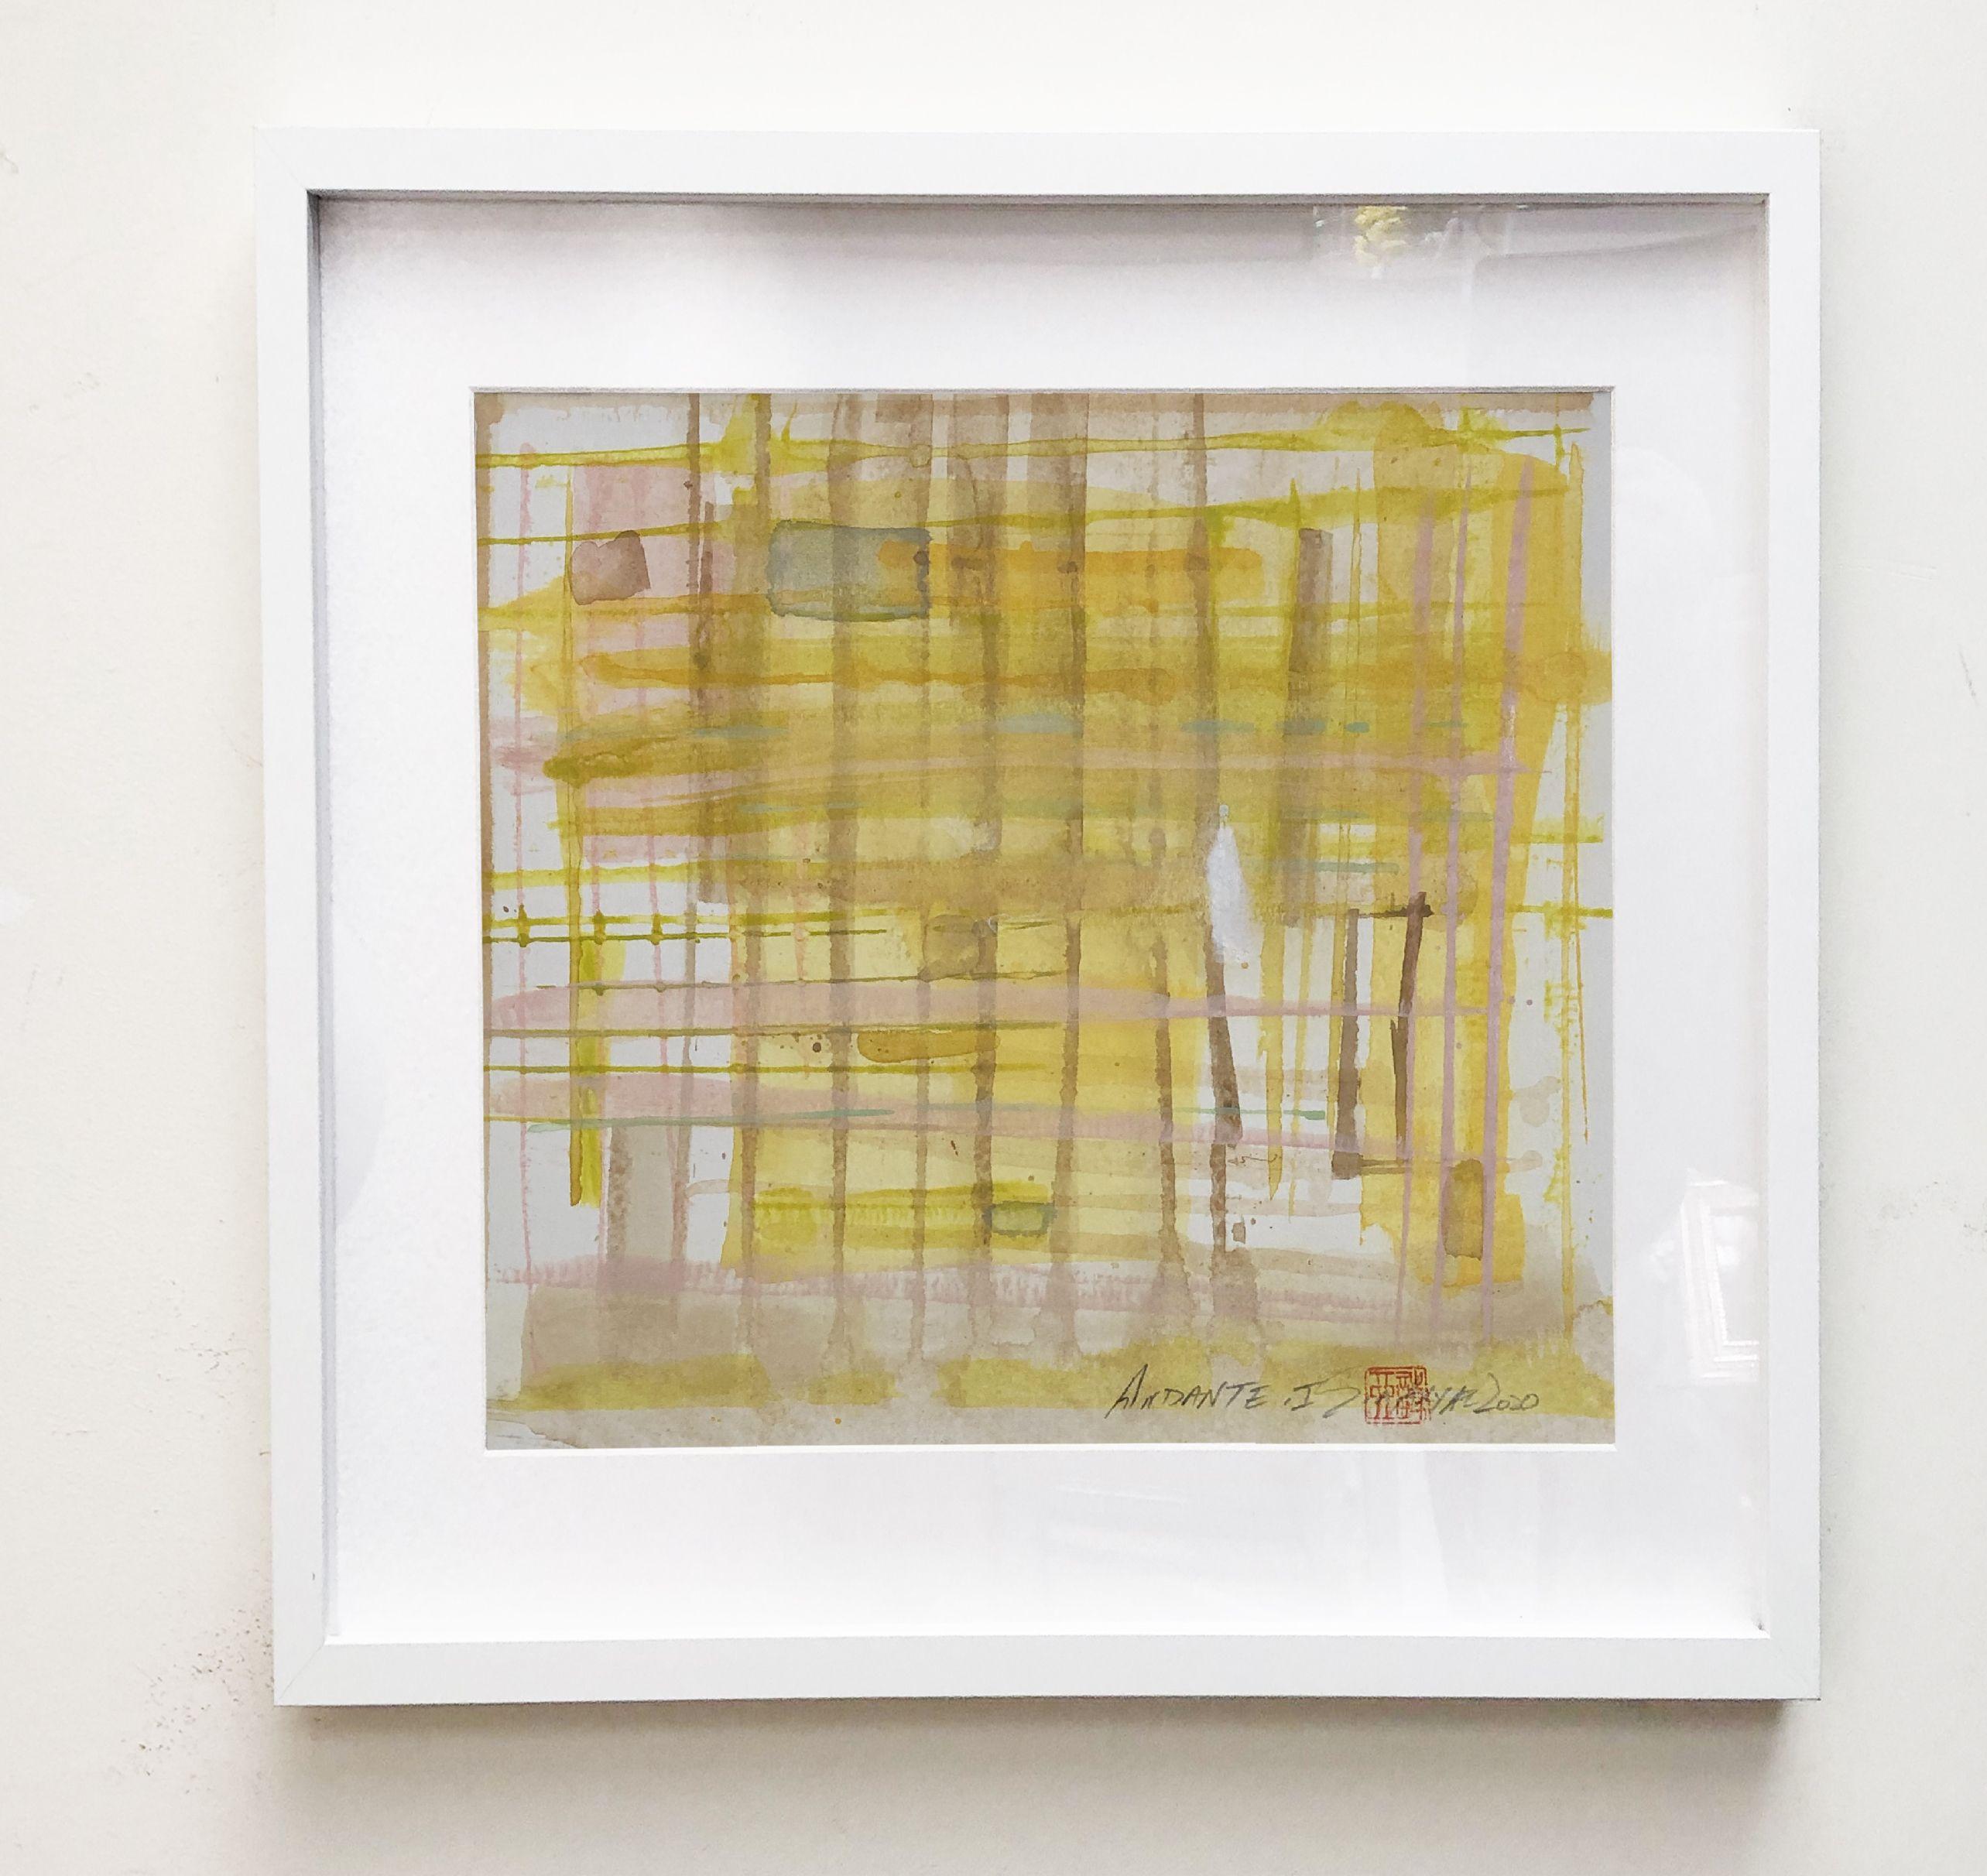 Andante. I Ready to Hang framed Original Abstract Painting  Yellow stands for playful and optimistic.   Shades of bold energetic yellow race across the palest white and beige background.   This lively original painting on heavy stock brings a pop of